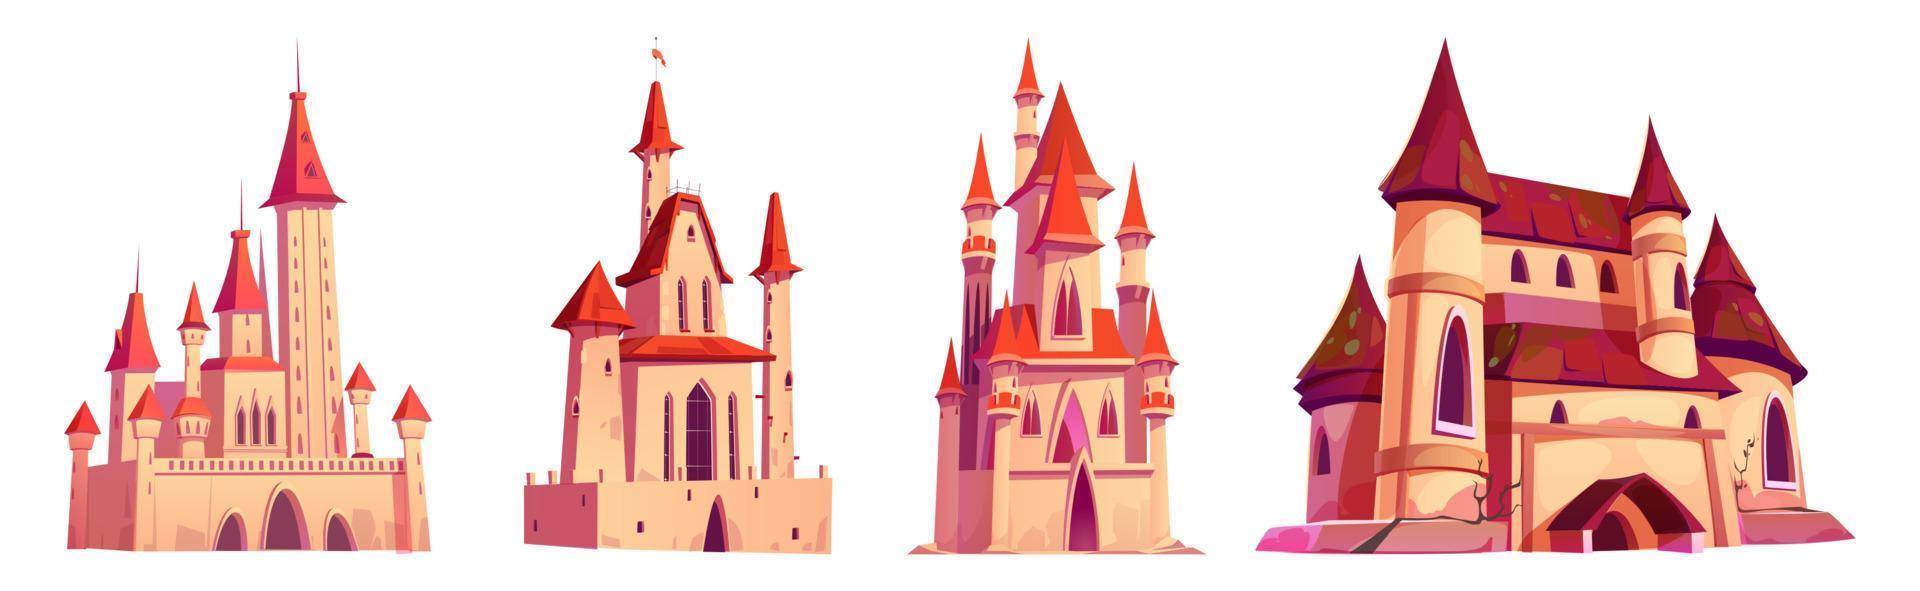 Medieval castles, palaces with turrets and flags vector